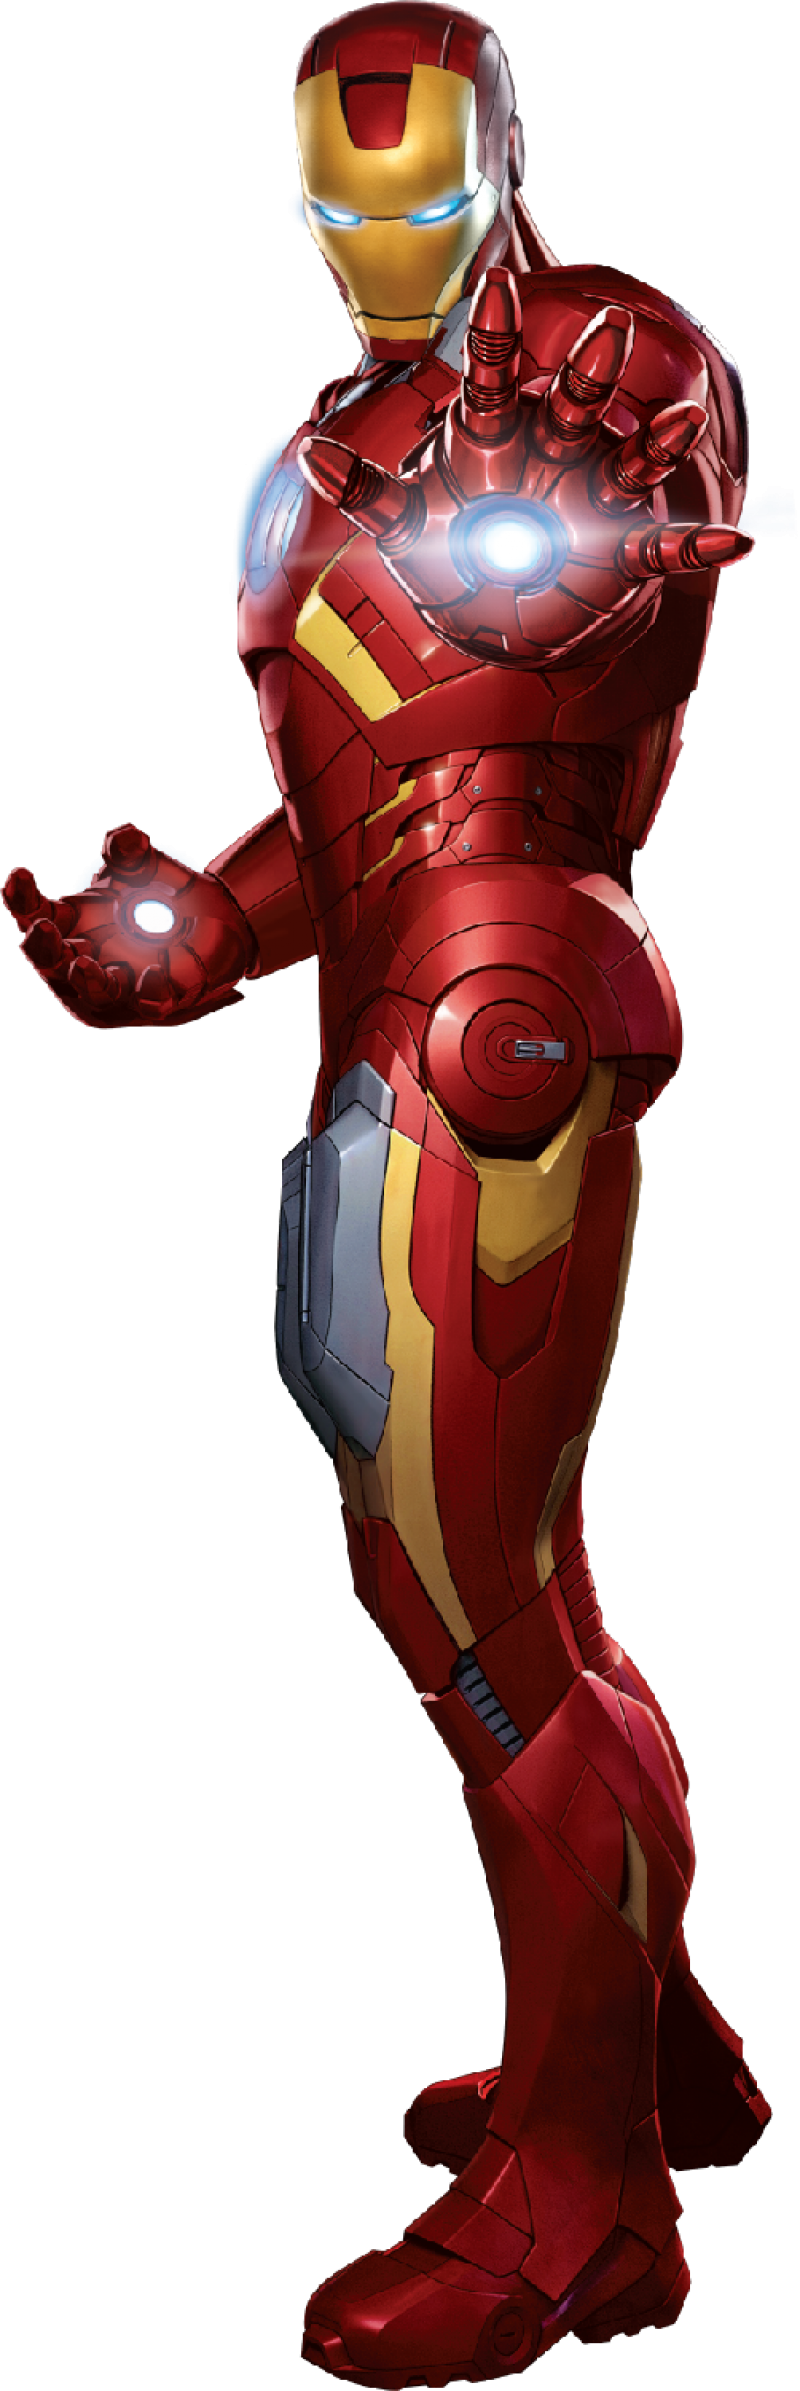 Ironman Avengers PNG Image - PurePNG | Free transparent CC0 PNG Image Library